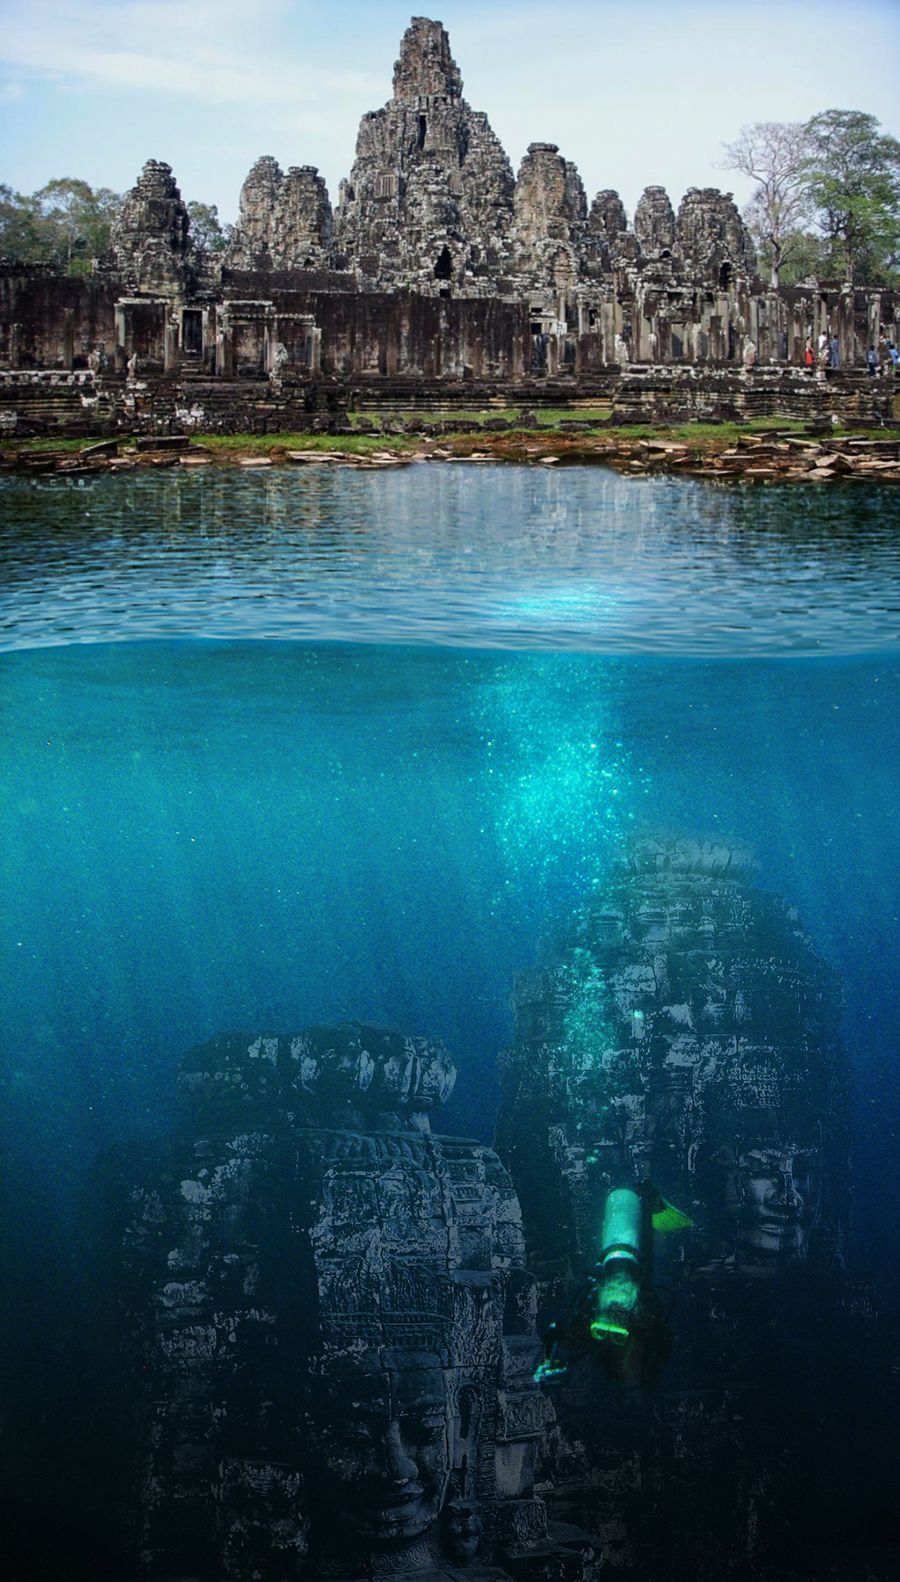 The Sunken Heads of Bayon Temple – Angkor, Cambodia